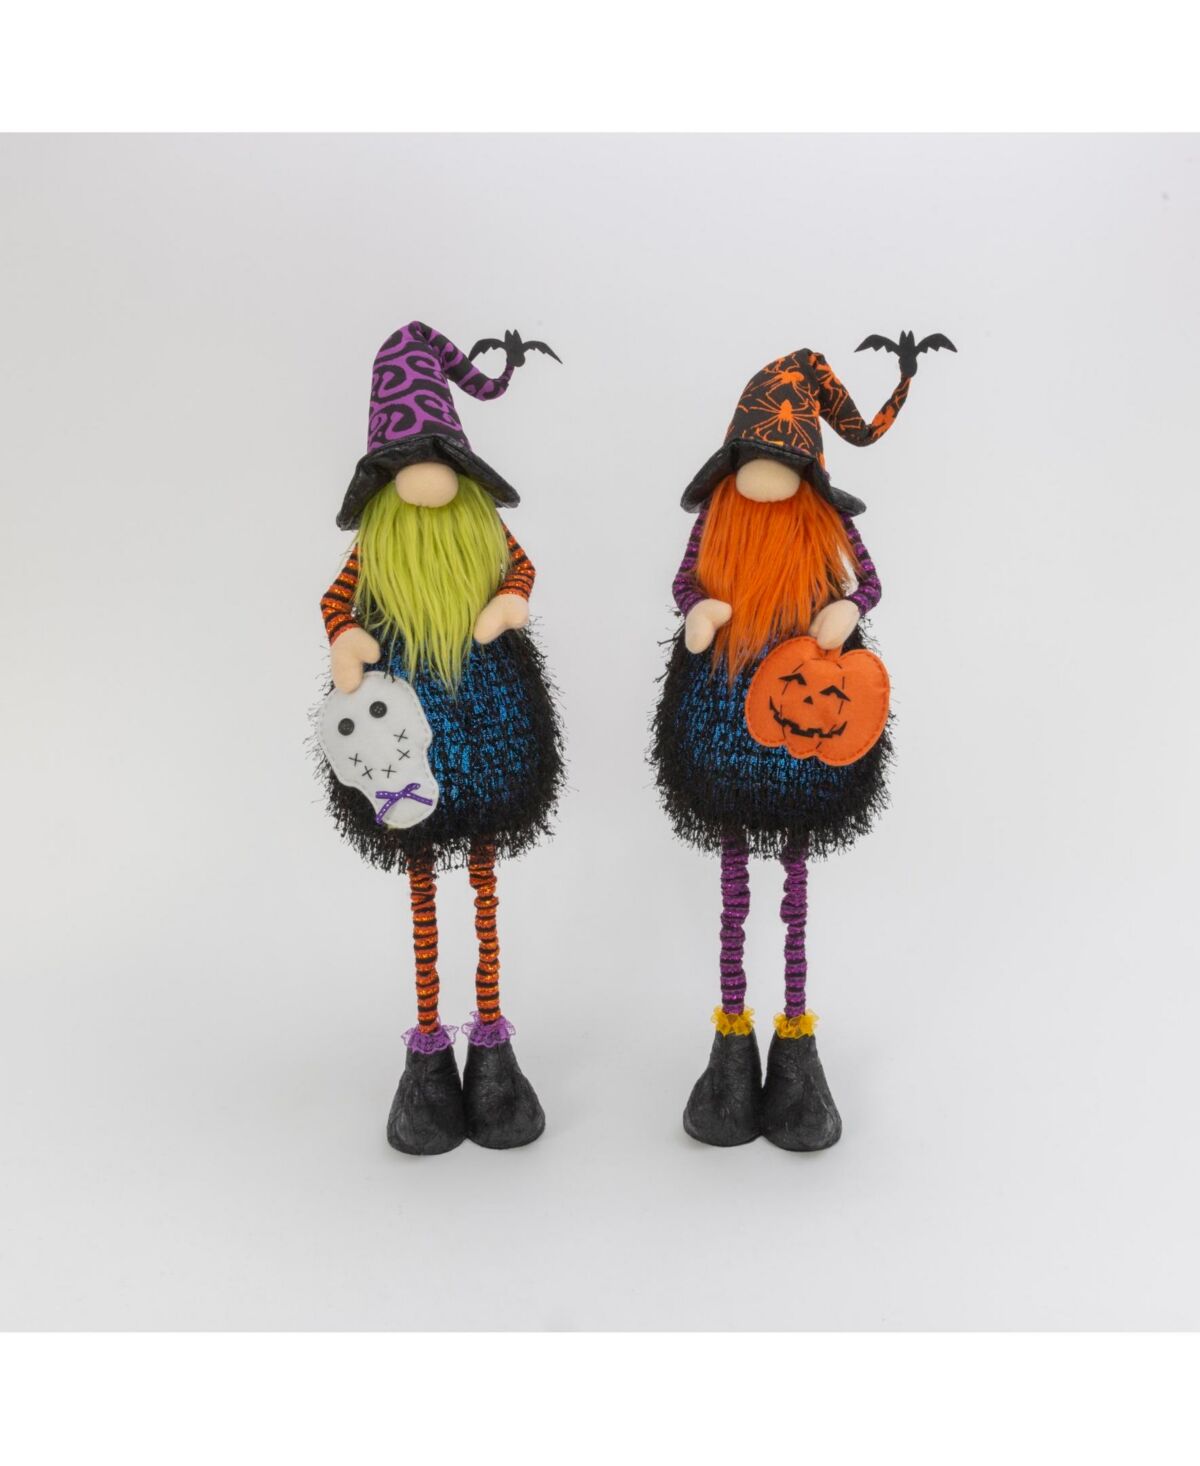 Gerson International Set of 2 Lighted Whimsical Halloween Gnomes with Flexible Legs - Multicolor